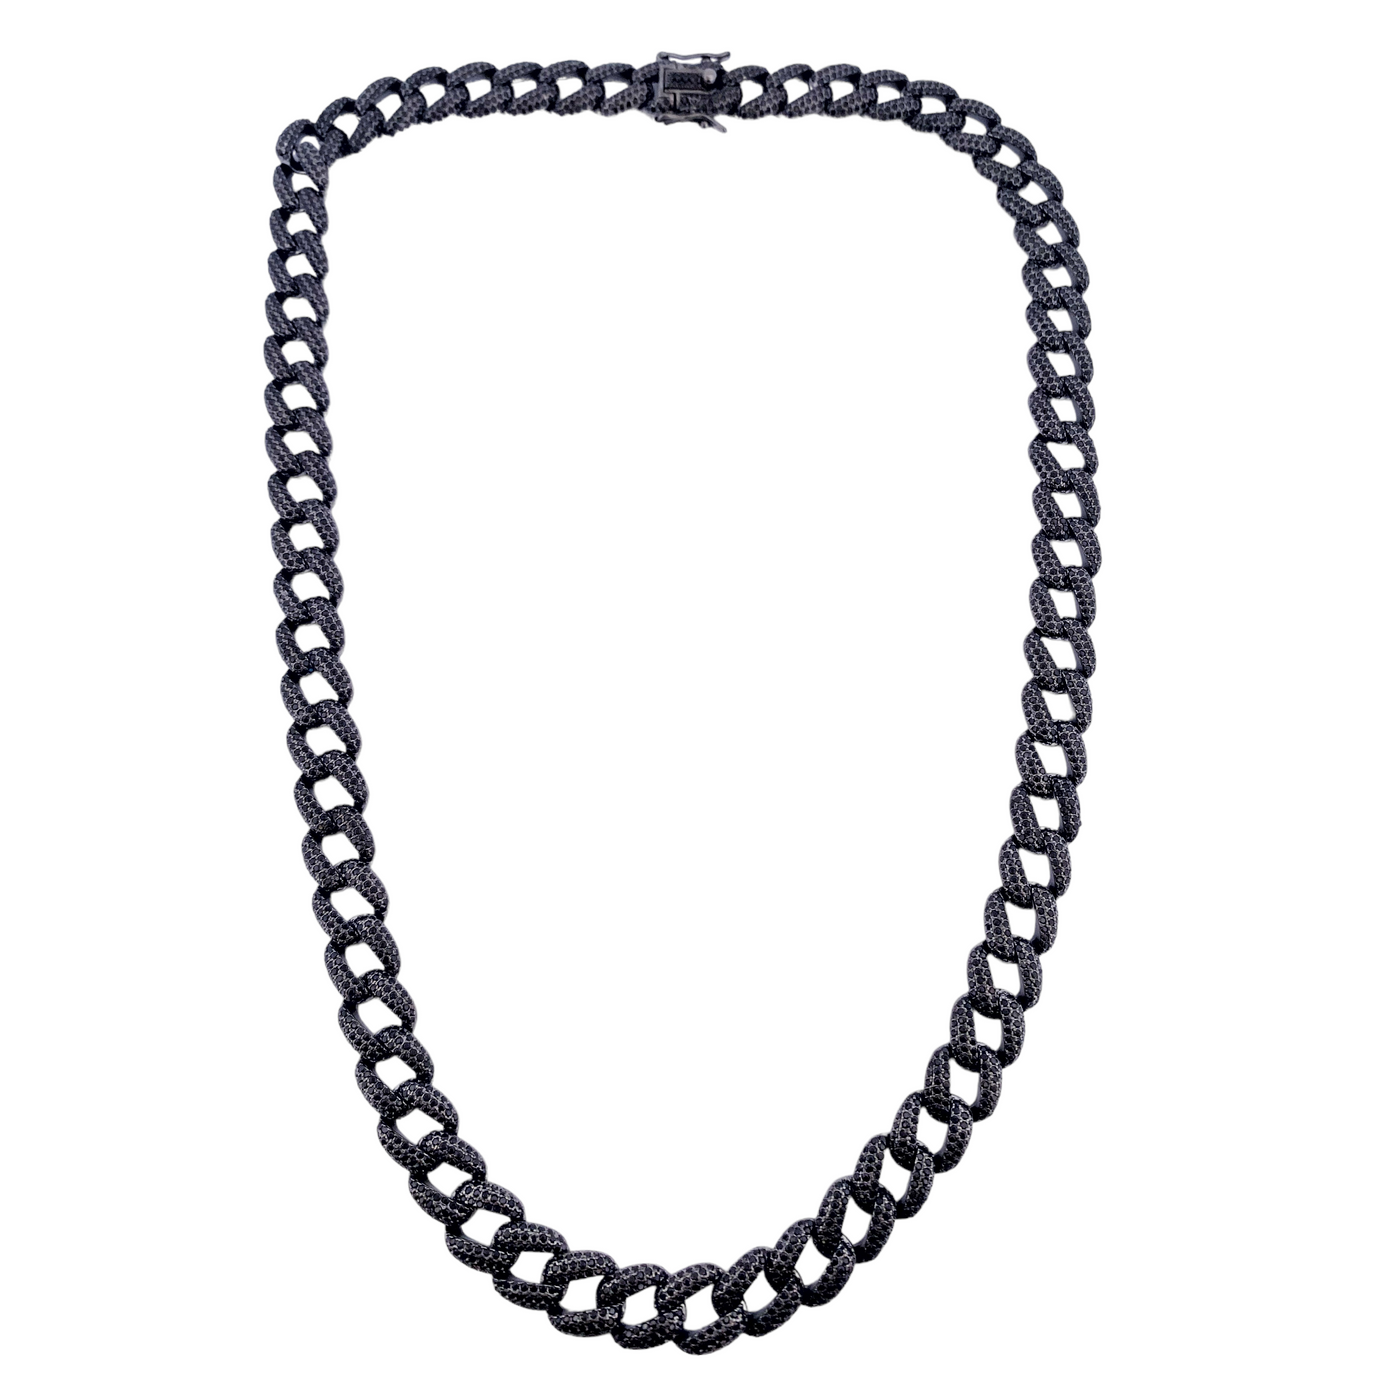 SILVER GROUMETTE NECKLACE - BLACK PLATED